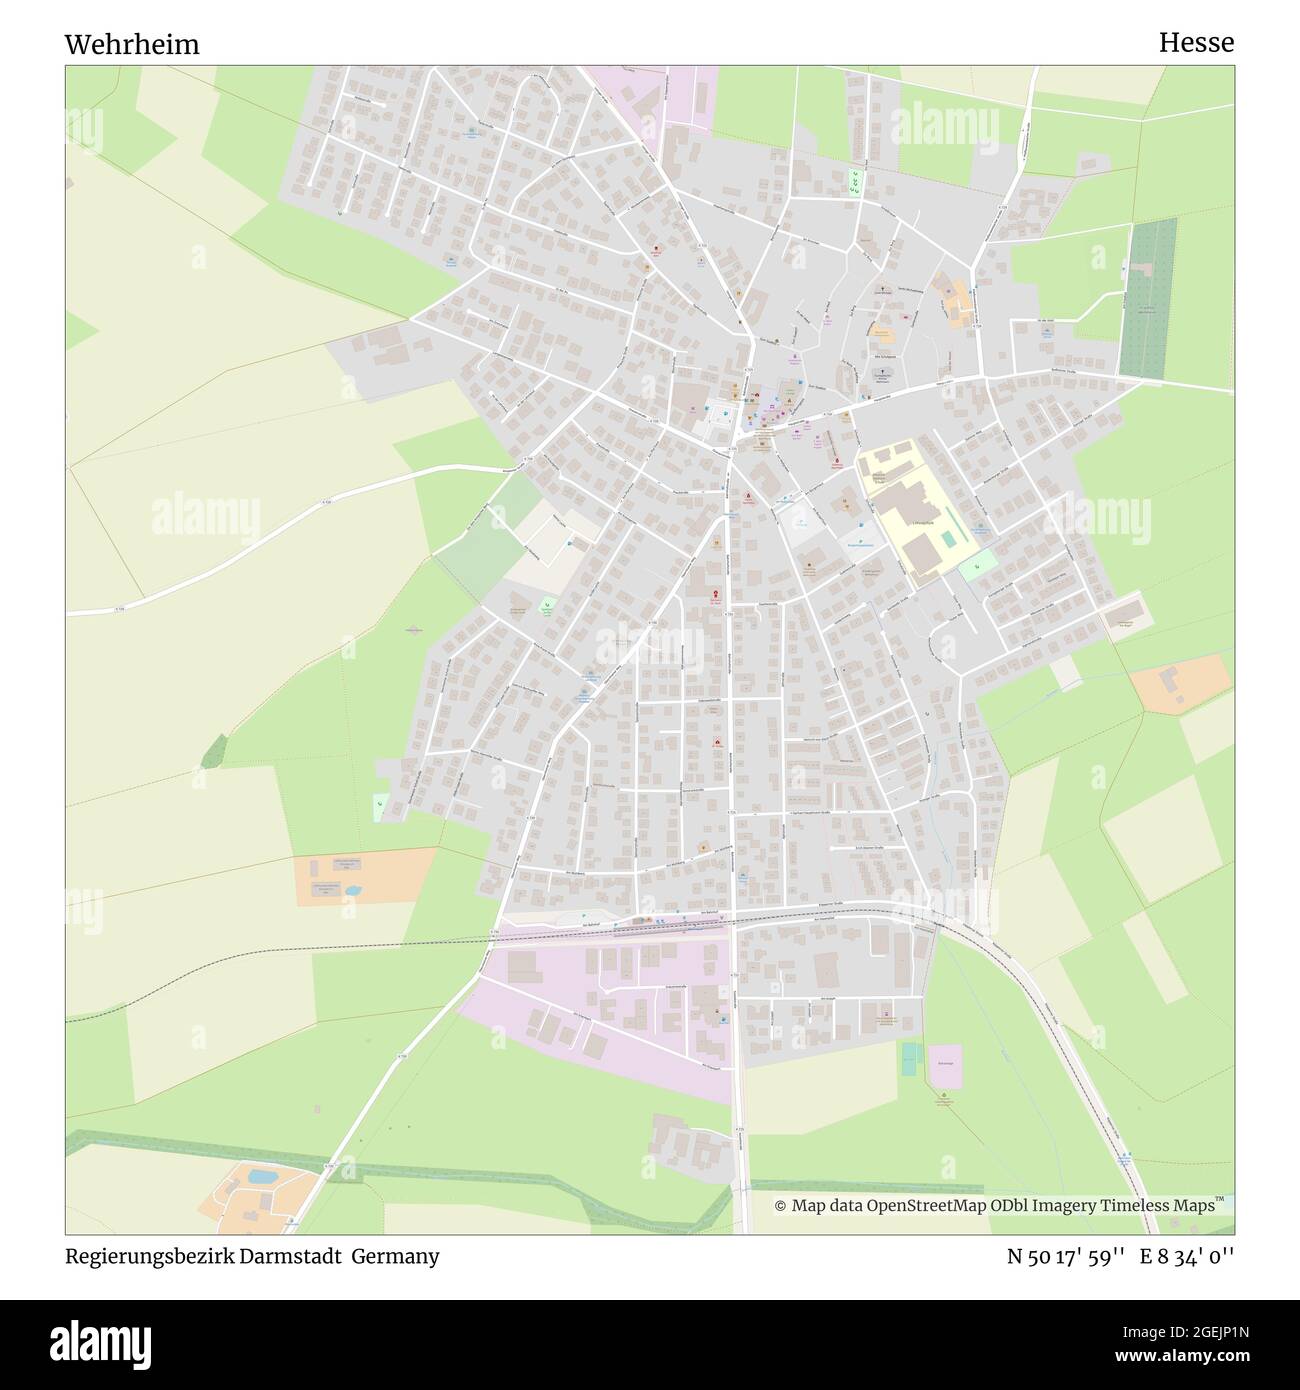 Wehrheim, Regierungsbezirk Darmstadt, Germany, Hesse, N 50 17' 59'', E 8 34' 0'', map, Timeless Map published in 2021. Travelers, explorers and adventurers like Florence Nightingale, David Livingstone, Ernest Shackleton, Lewis and Clark and Sherlock Holmes relied on maps to plan travels to the world's most remote corners, Timeless Maps is mapping most locations on the globe, showing the achievement of great dreams Stock Photo